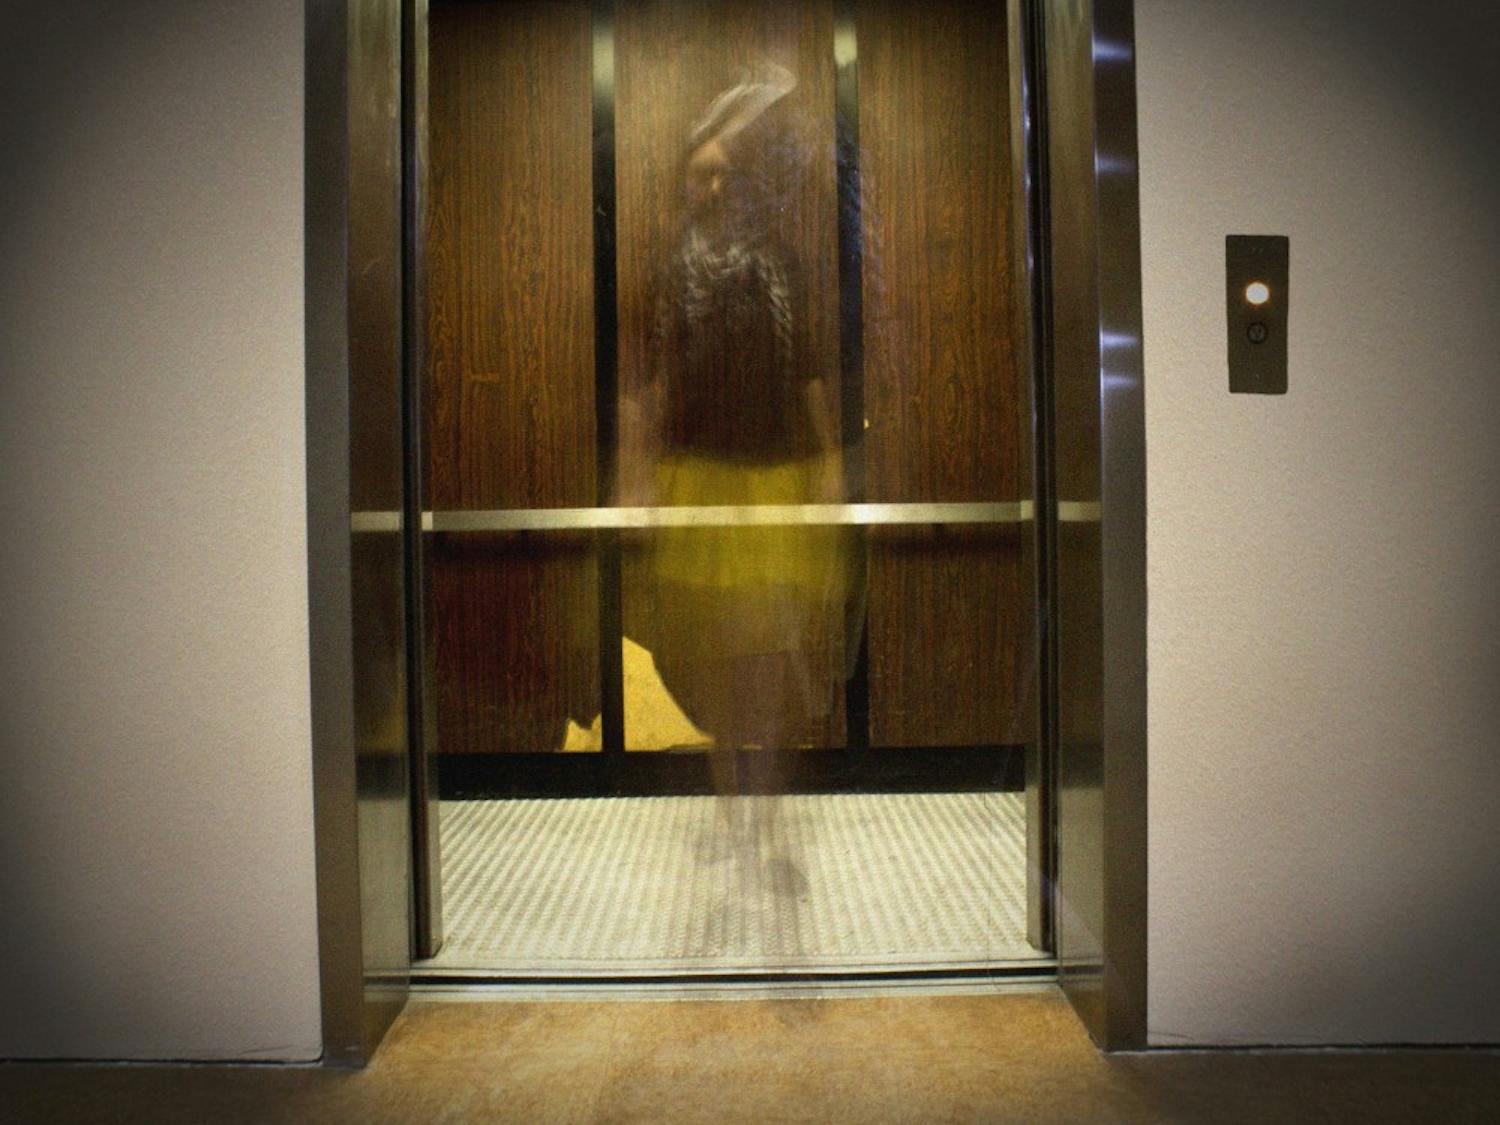 	A football player was decapitated by the elevator doors in Mesa Vista Hall in the 1970s. It is rumored that the player’s ghost haunts the building, but Department of History Chairperson Charlie Steen says the building is just old. 